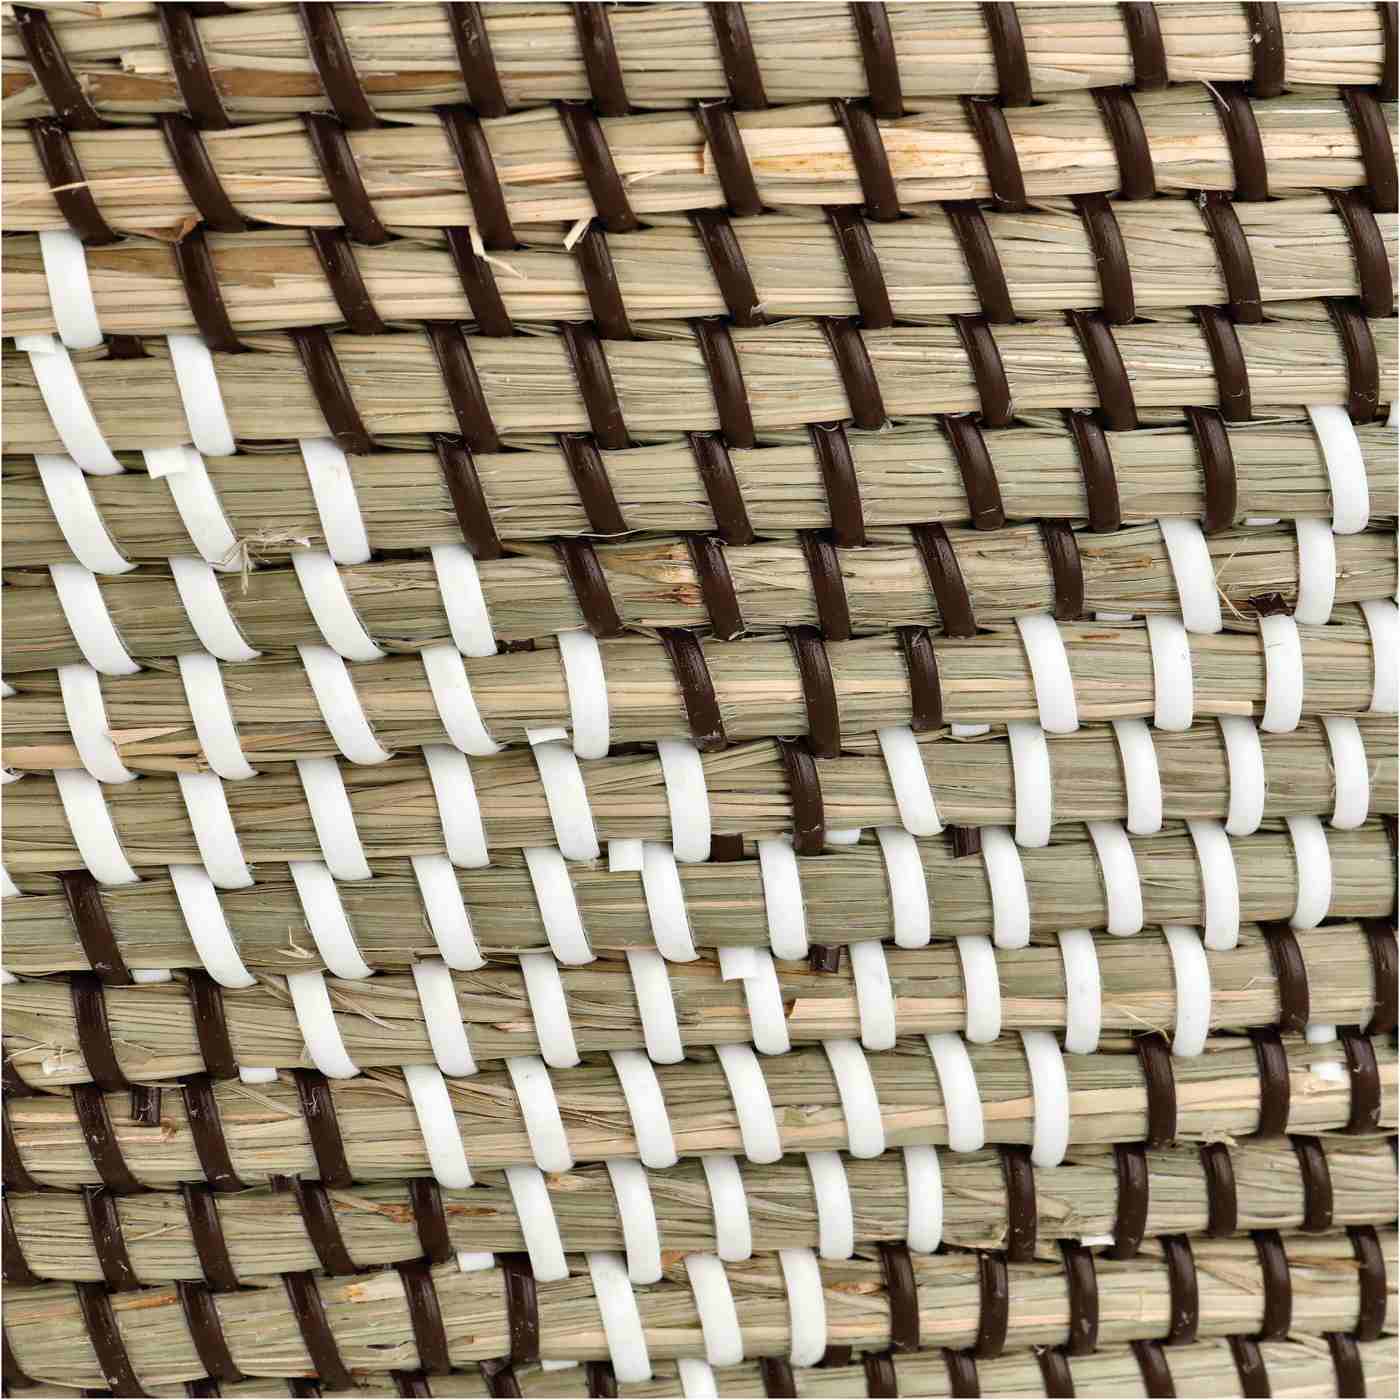 Haven + Key Tapered Woven Seagrass Basket; image 2 of 2